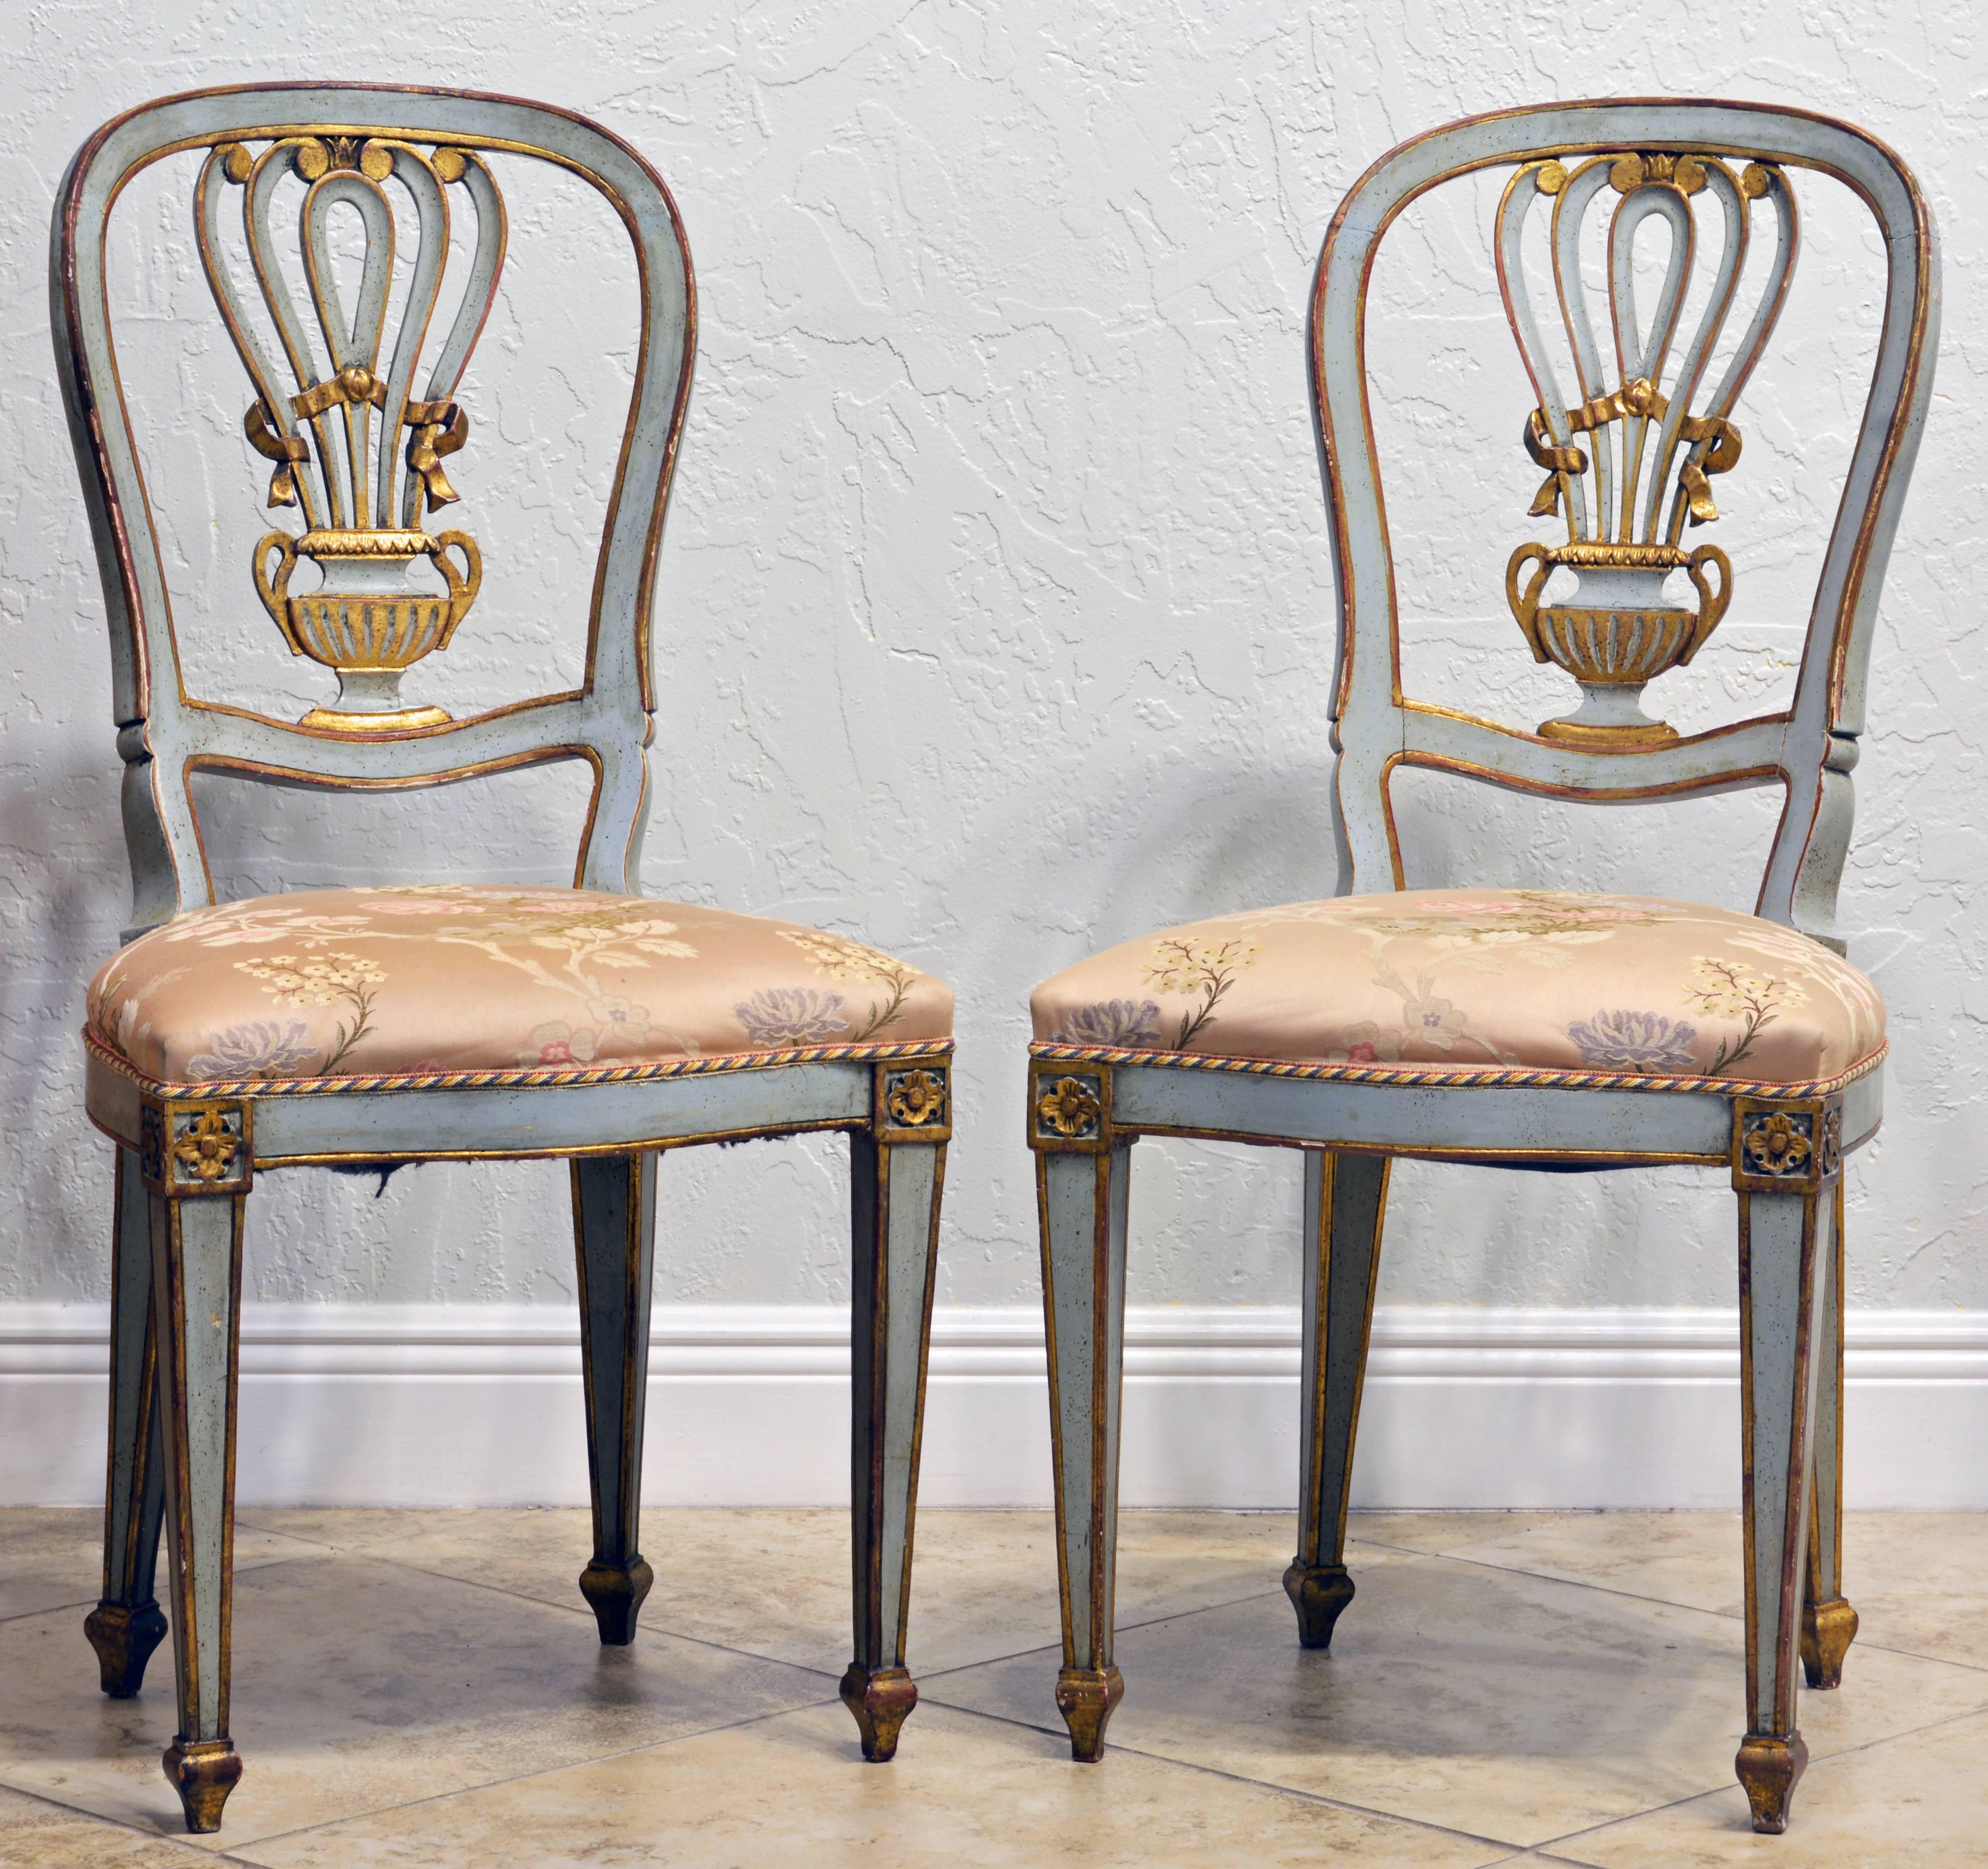 The combination of the grey paint and decorative gilt accents is very pleasing. The curved back frame centers a charming gilt urn and ribbon splat. The seats are upholstered and covered with peach colored apple blossom brocade in excellent condition.